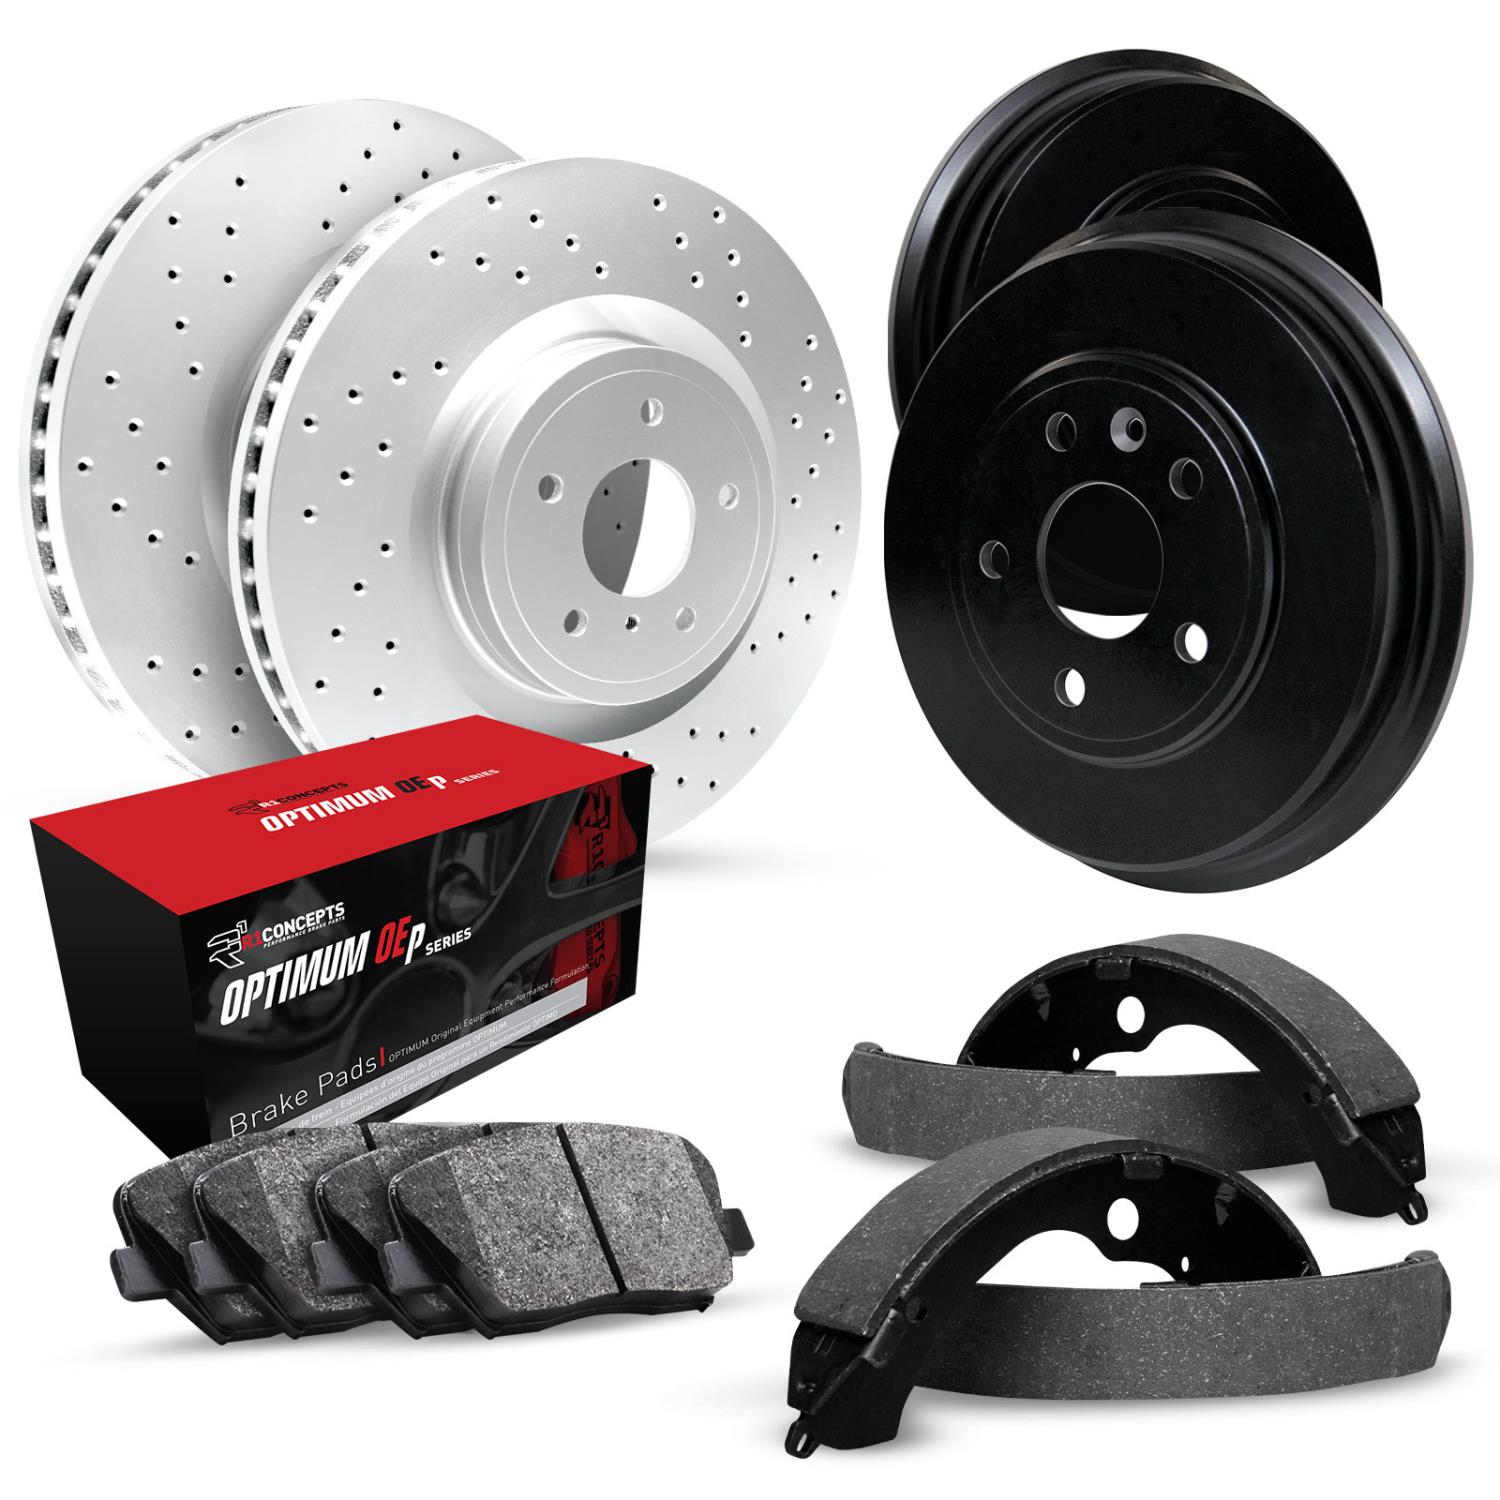 GEO-Carbon Drilled Brake Rotor & Drum Set w/Optimum OE Pads & Shoes, 1967-1970 GM, Position: Front & Rear